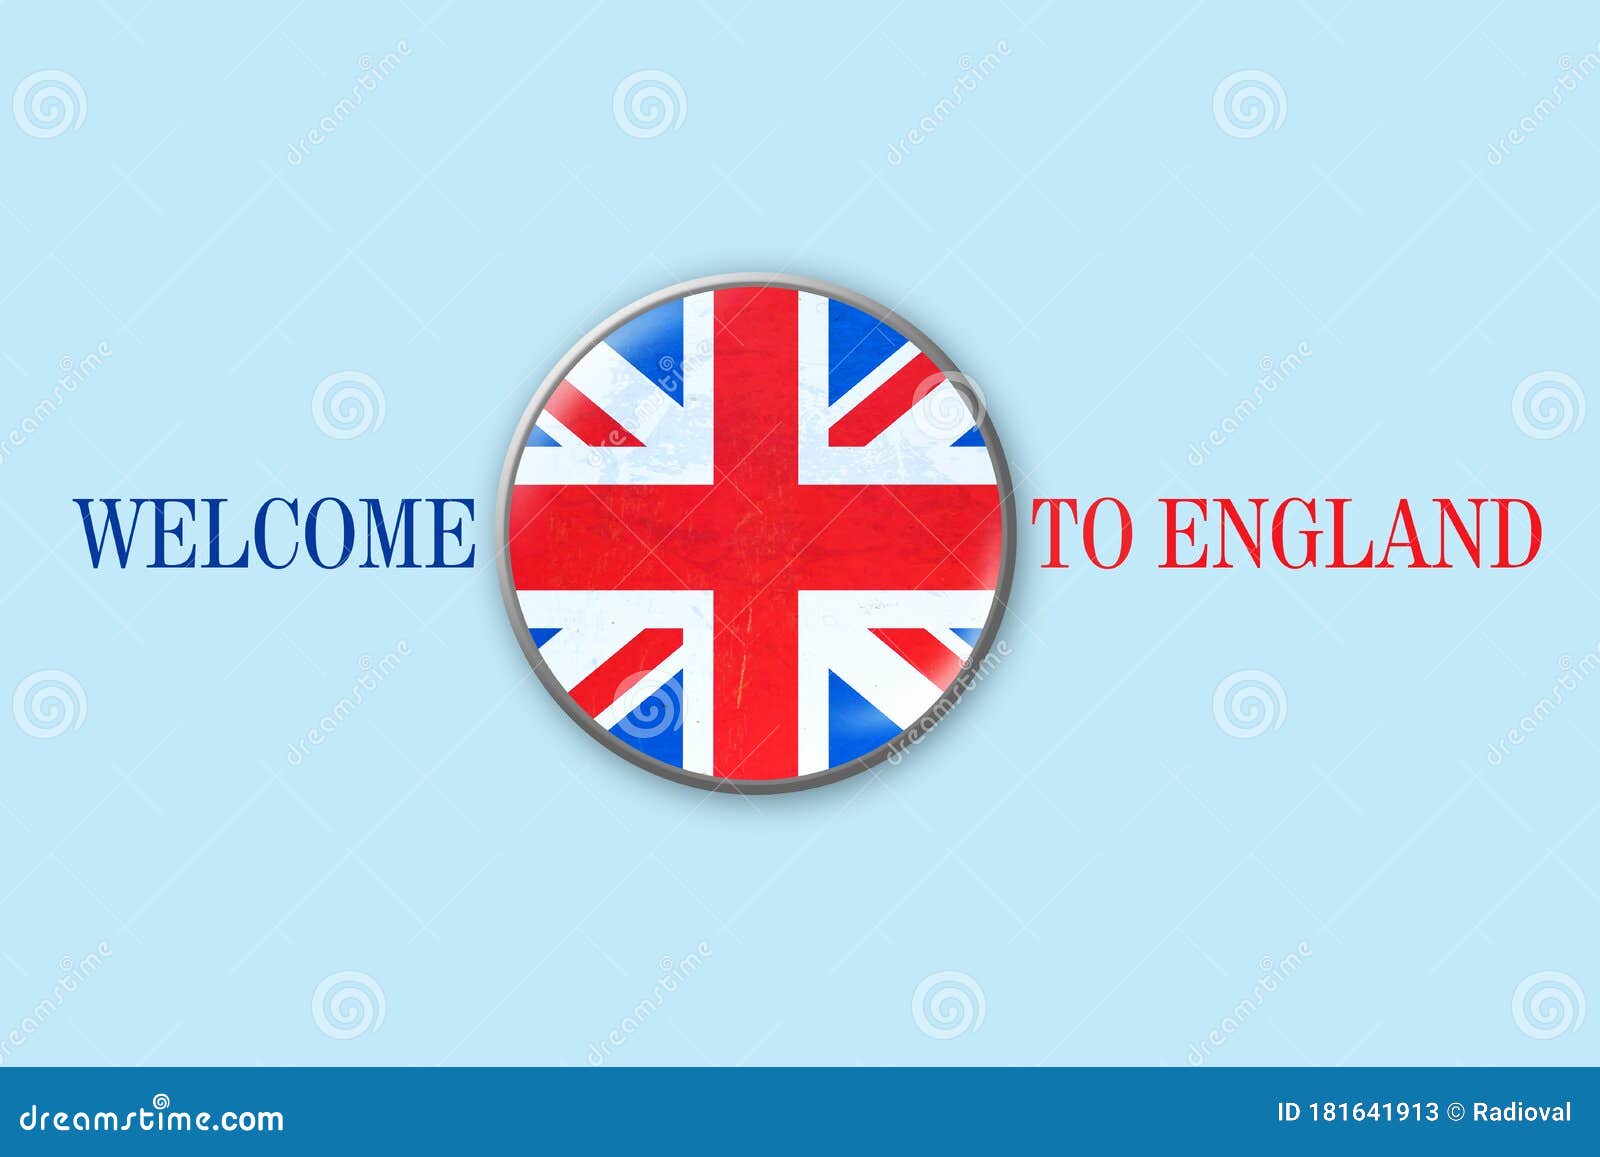 England Flag in a Round Icon on a Blue Background. Welcome To America.  Travels Stock Image - Image of city, beautiful: 181641913